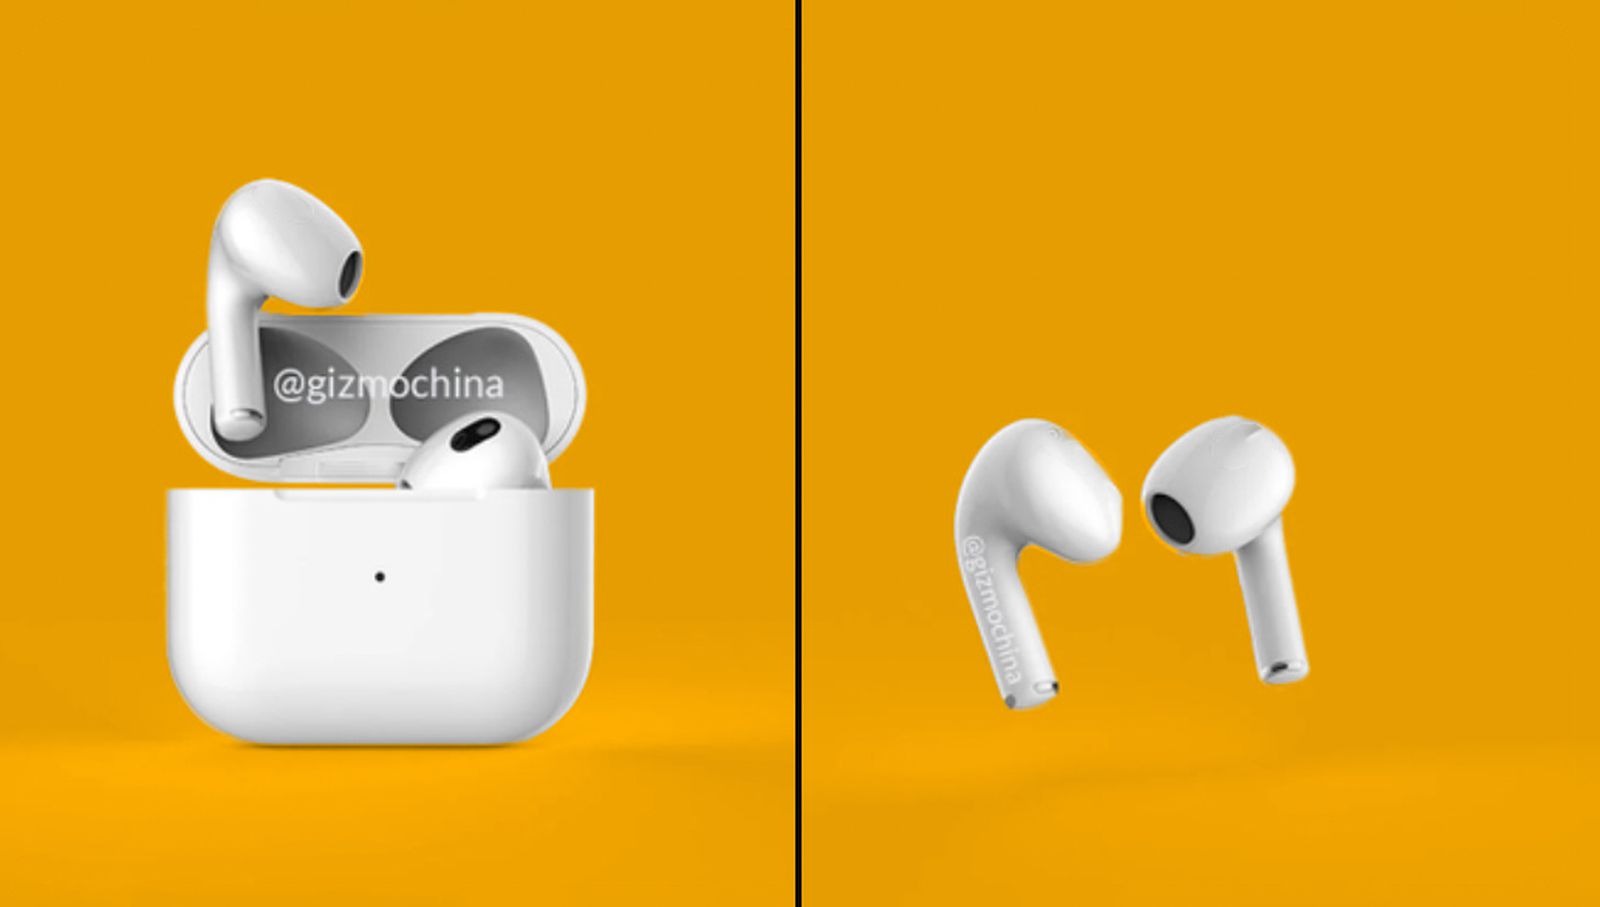 Proven Leaker claims that new AirPods are ready for shipment, the new 12.9-inch iPad Pro is likely to outperform the 11-inch model